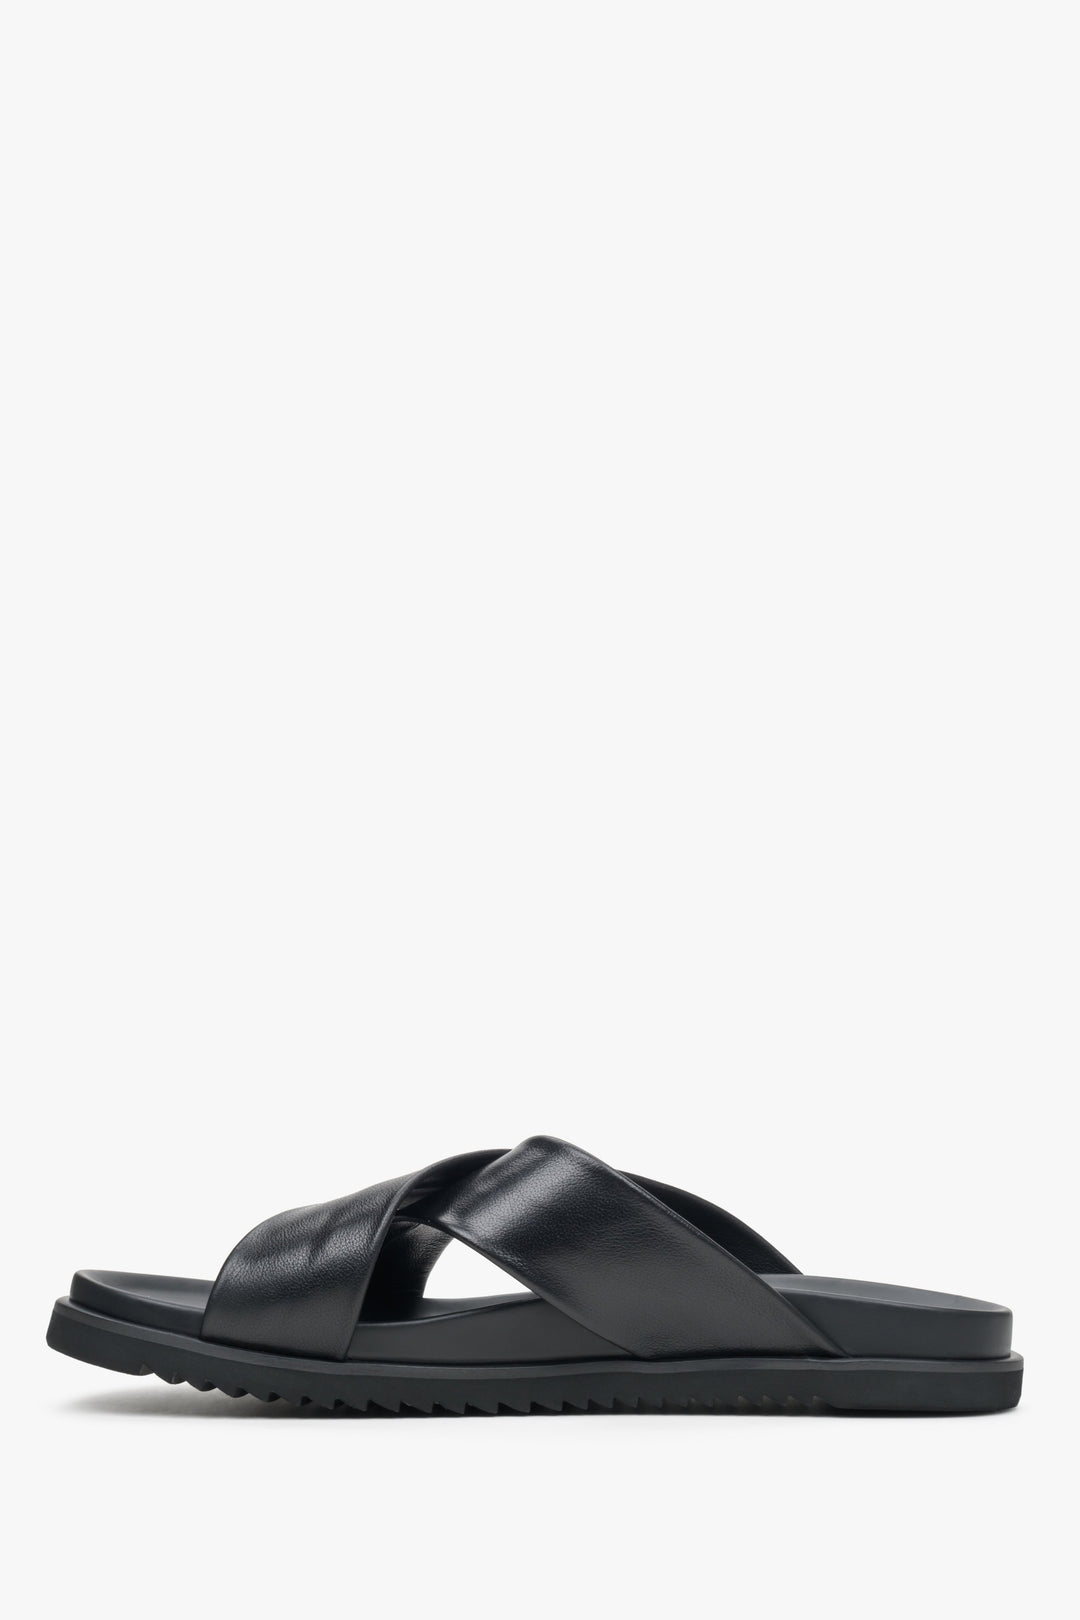 Soft men's summer sandals by Estro made from genuine and synthetic leather - black shoe profile.